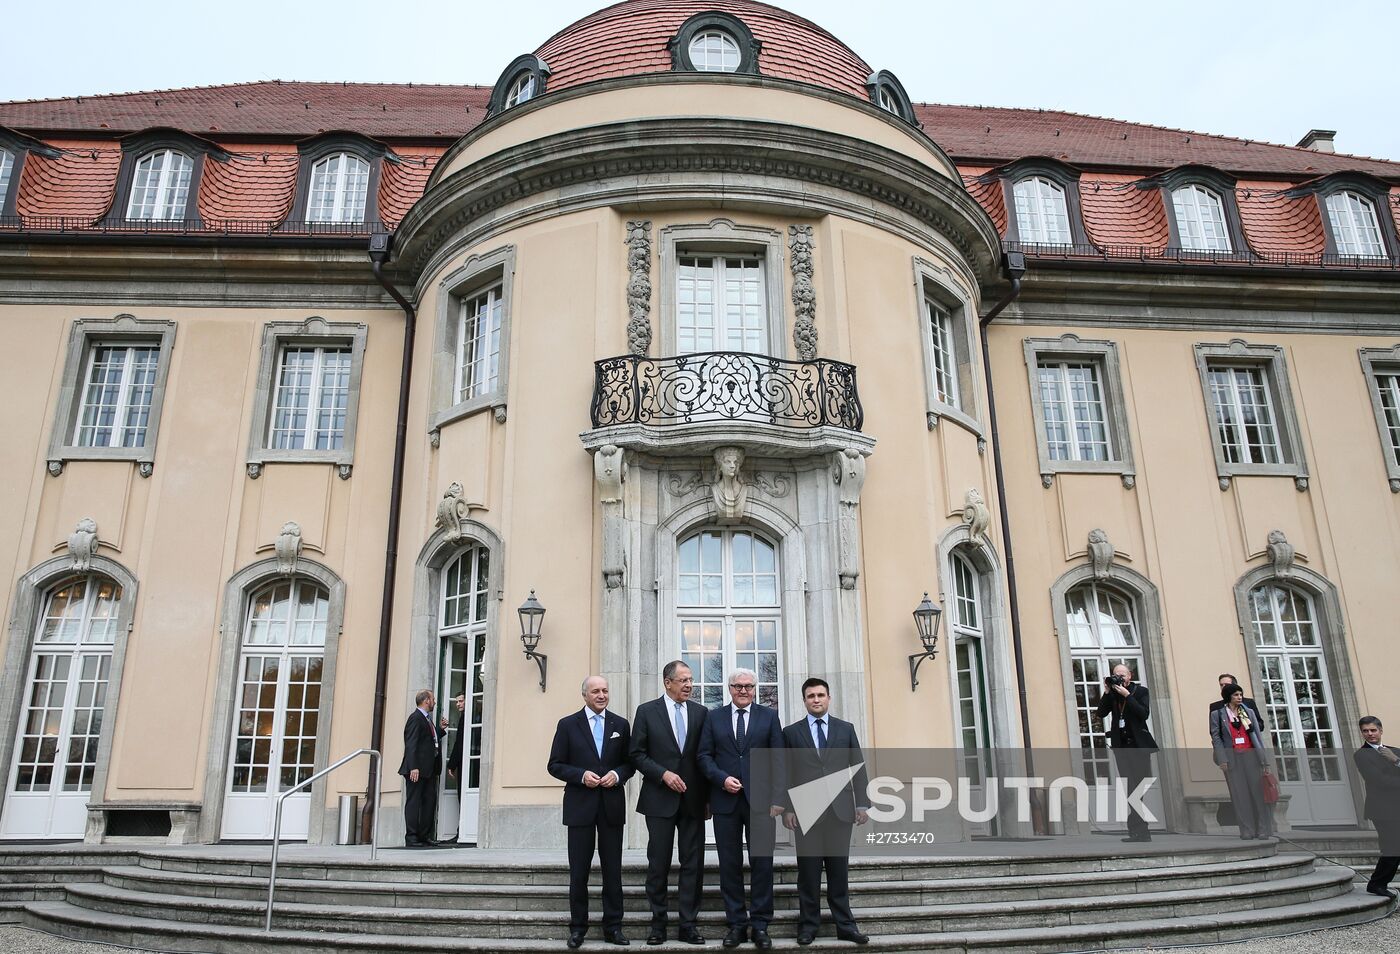 Normandy Four foreign ministers meet in Berlin